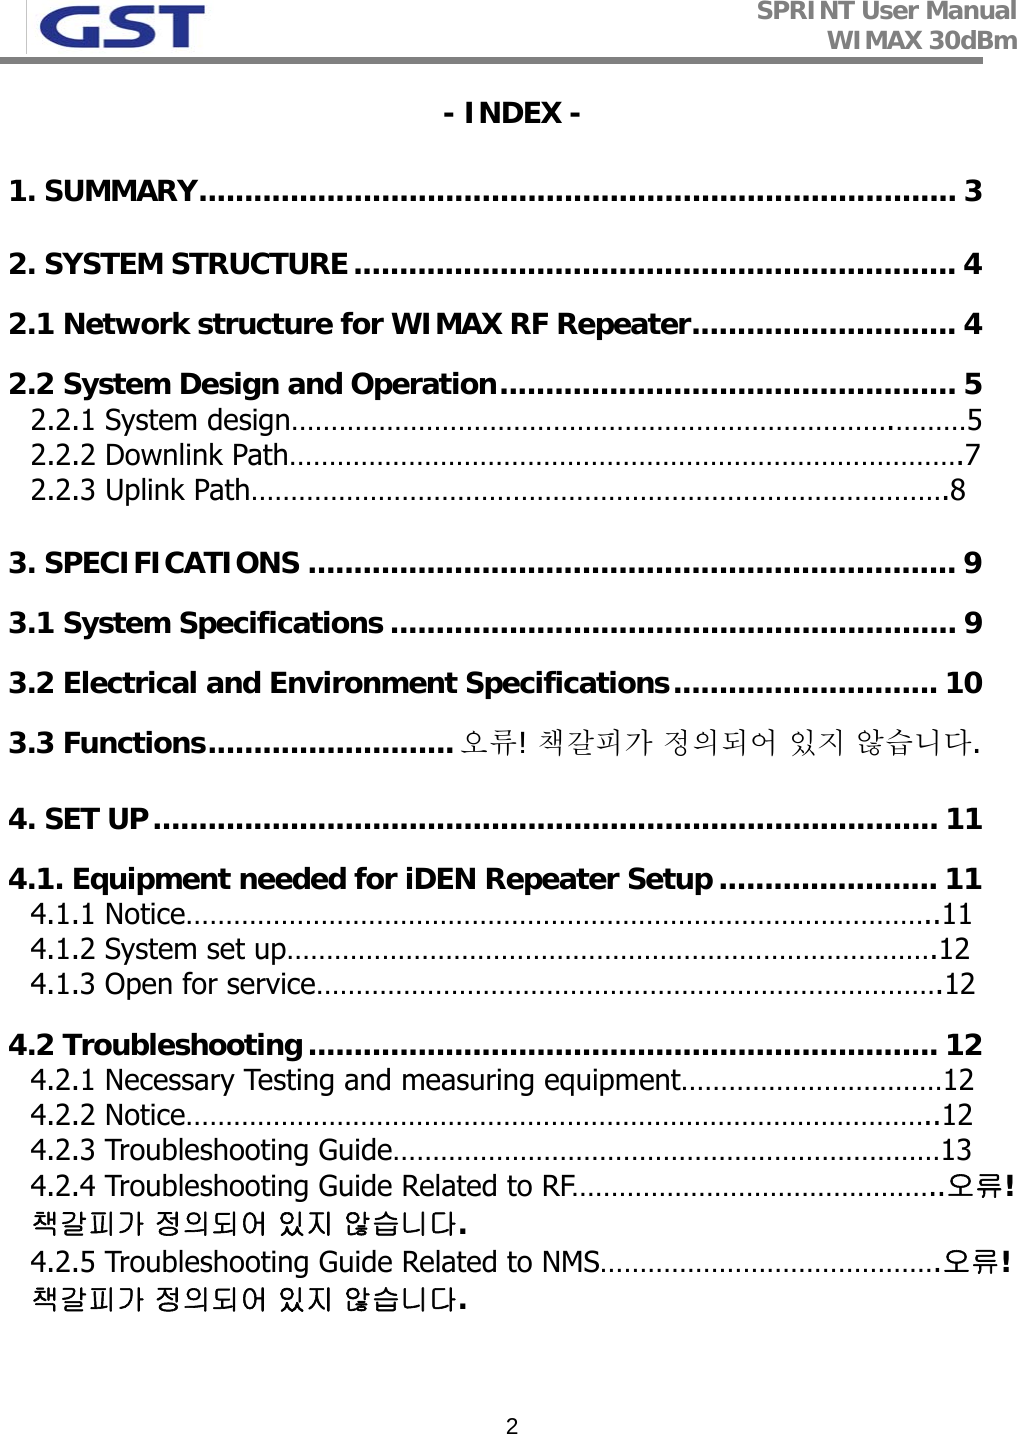 SPRINT User Manual WIMAX 30dBm   2- INDEX - 1. SUMMARY................................................................................... 3 2. SYSTEM STRUCTURE.................................................................. 4 2.1 Network structure for WIMAX RF Repeater............................. 4 2.2 System Design and Operation.................................................. 5 2.2.1 System design………………………………………………………………….………5 2.2.2 Downlink Path………………………………………………………………………….7 2.2.3 Uplink Path…………………………………………………………………………….8 3. SPECIFICATIONS ....................................................................... 9 3.1 System Specifications .............................................................. 9 3.2 Electrical and Environment Specifications............................. 10 3.3 Functions...........................오류! 책갈피가 정의되어 있지 않습니다. 4. SET UP...................................................................................... 11 4.1. Equipment needed for iDEN Repeater Setup ........................ 11 4.1.1 Notice…………………………………………………………………………………..11 4.1.2 System set up……………………………………………………………………….12 4.1.3 Open for service…………………………………………………………………….12 4.2 Troubleshooting..................................................................... 12 4.2.1 Necessary Testing and measuring equipment……………………………12 4.2.2 Notice…………………………………………………………………………………..12 4.2.3 Troubleshooting Guide……………………………………………………………13 4.2.4 Troubleshooting Guide Related to RF………………………………………..오류! 책갈피가 정의되어 있지 않습니다. 4.2.5 Troubleshooting Guide Related to NMS…………………………………….오류! 책갈피가 정의되어 있지 않습니다.  